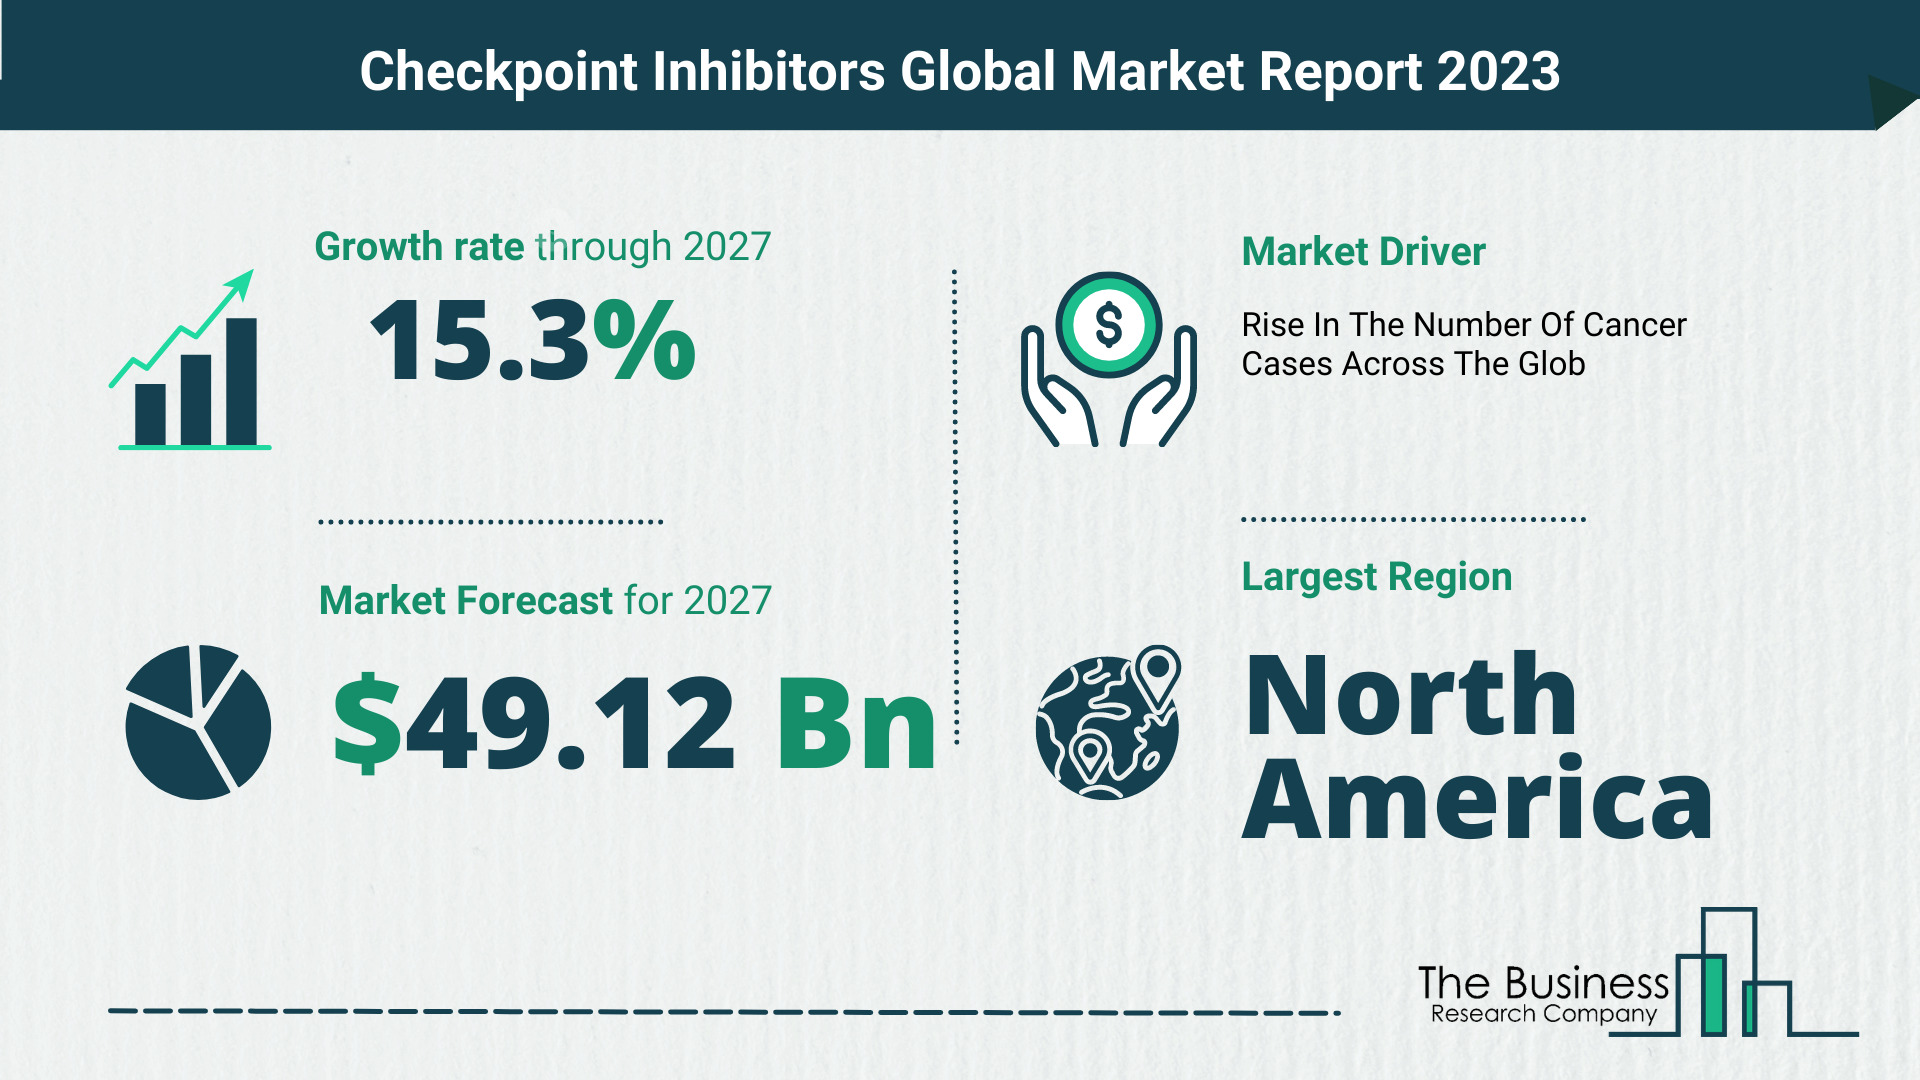 Global Checkpoint Inhibitors Market